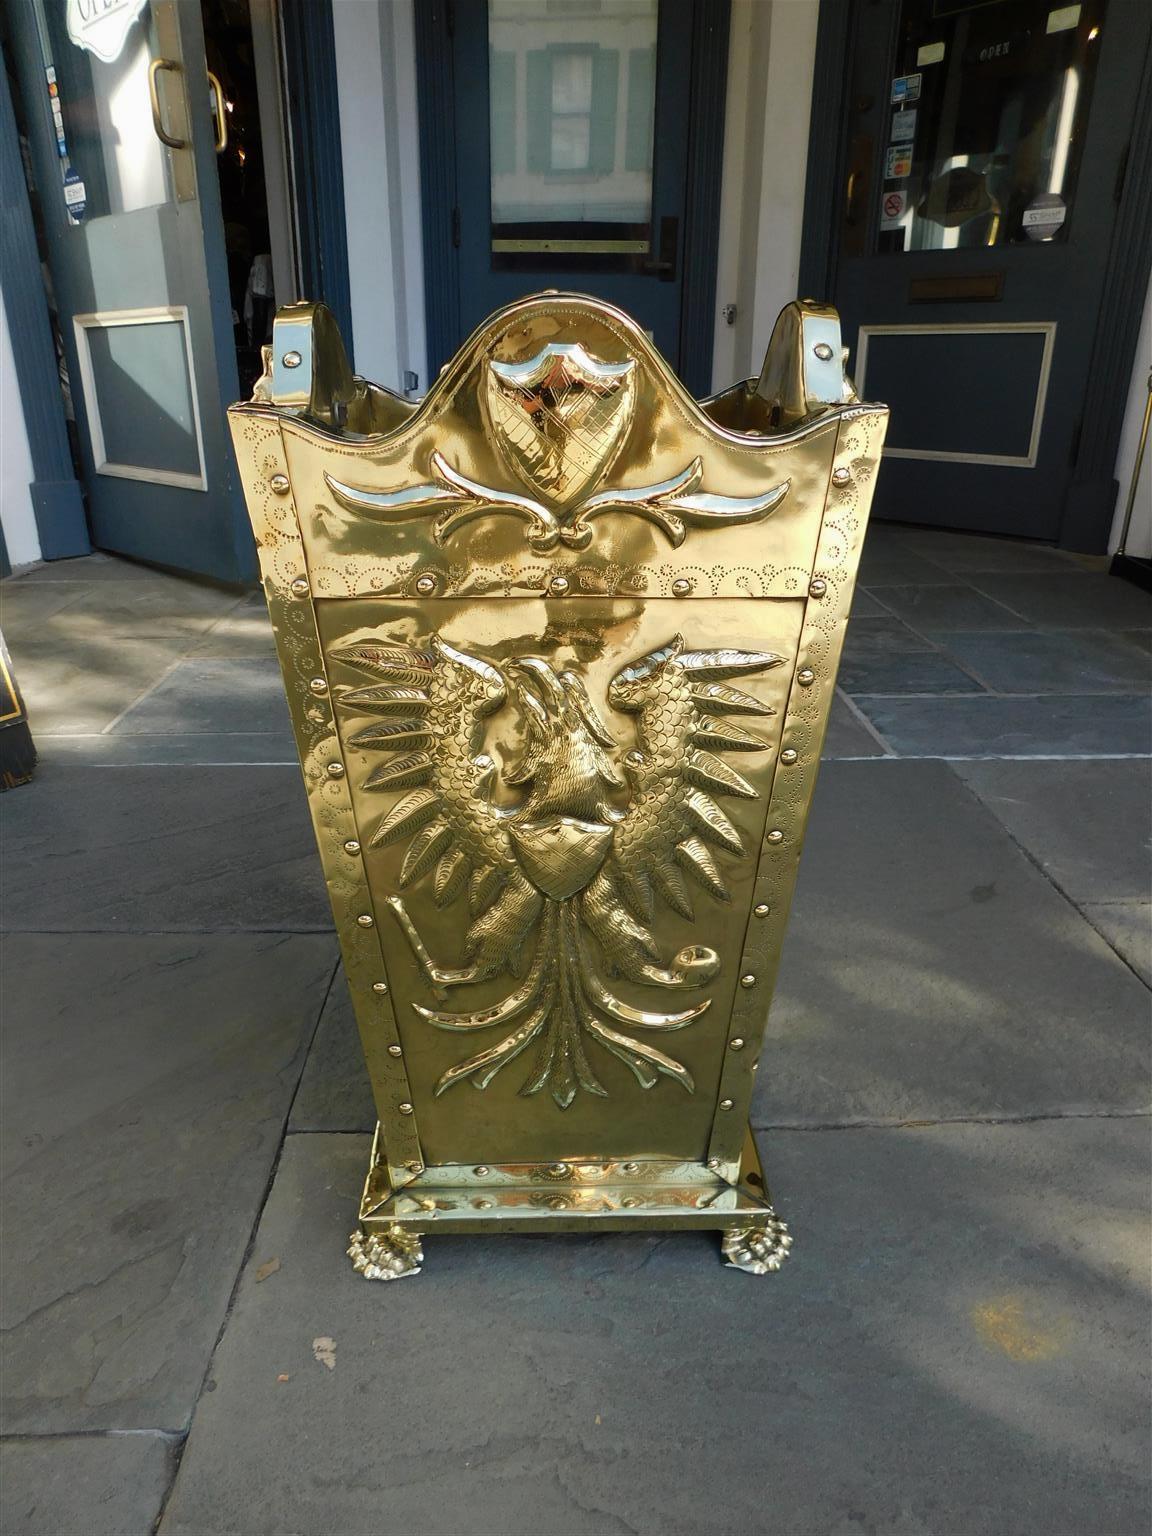 Russian embossed brass umbrella / walking stick stand with four serpentine studded panels decorated with eagle and shield motif, flanking lion head pulls, lead lined interior, and resting on a molded edge base with the original lion paw feet. Mid